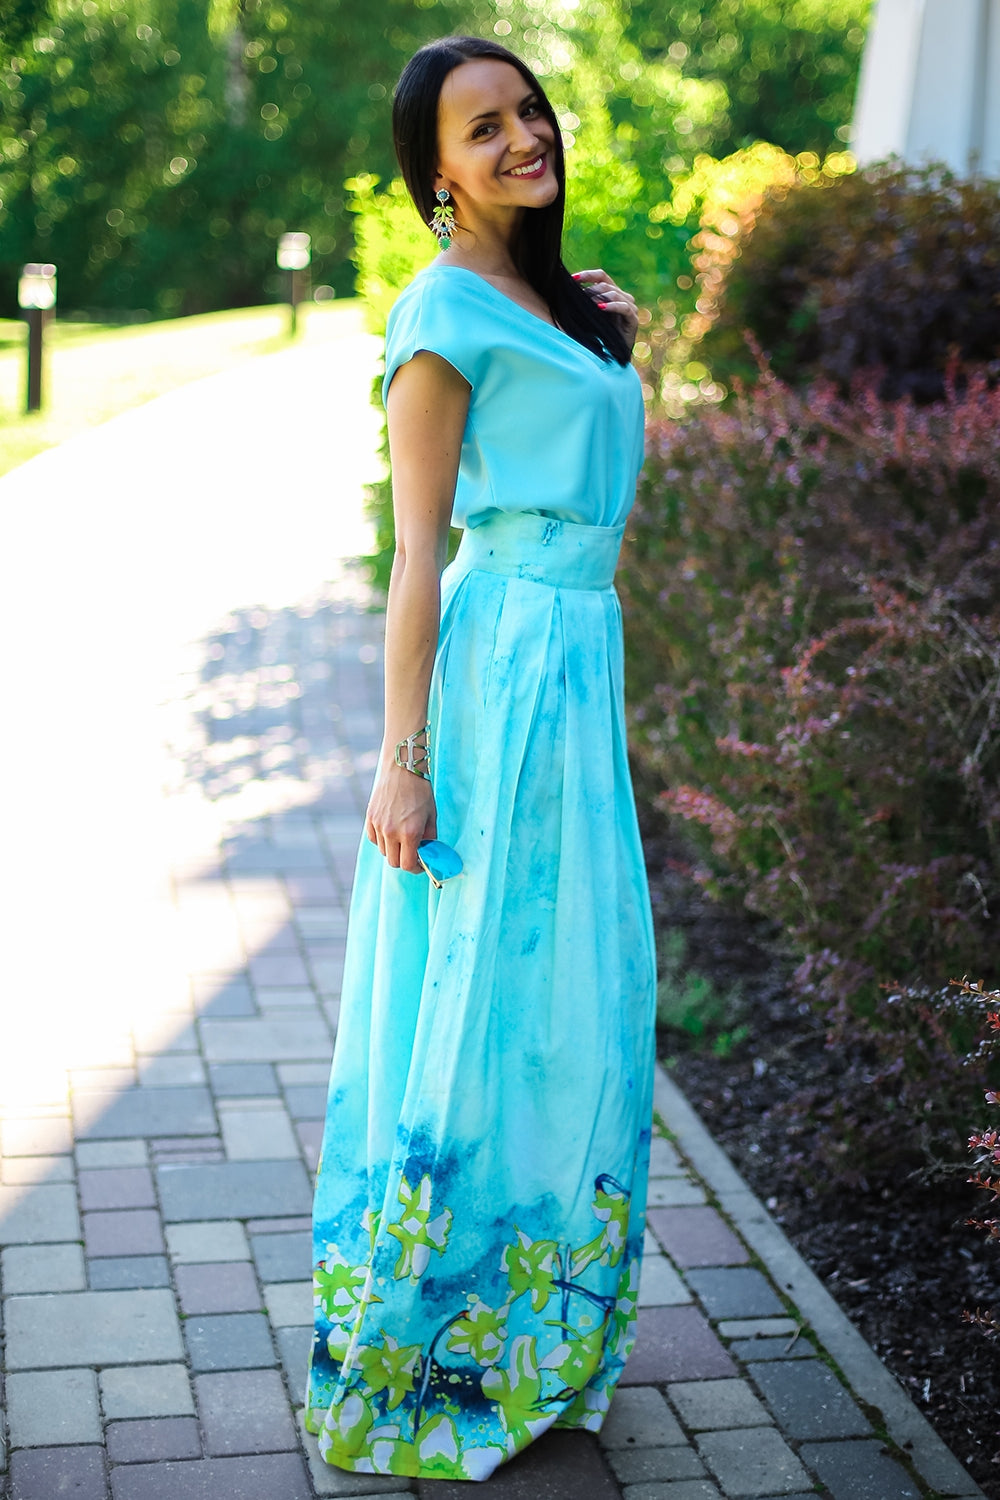 Long cotton skirt in turquoise color with printed narcise print